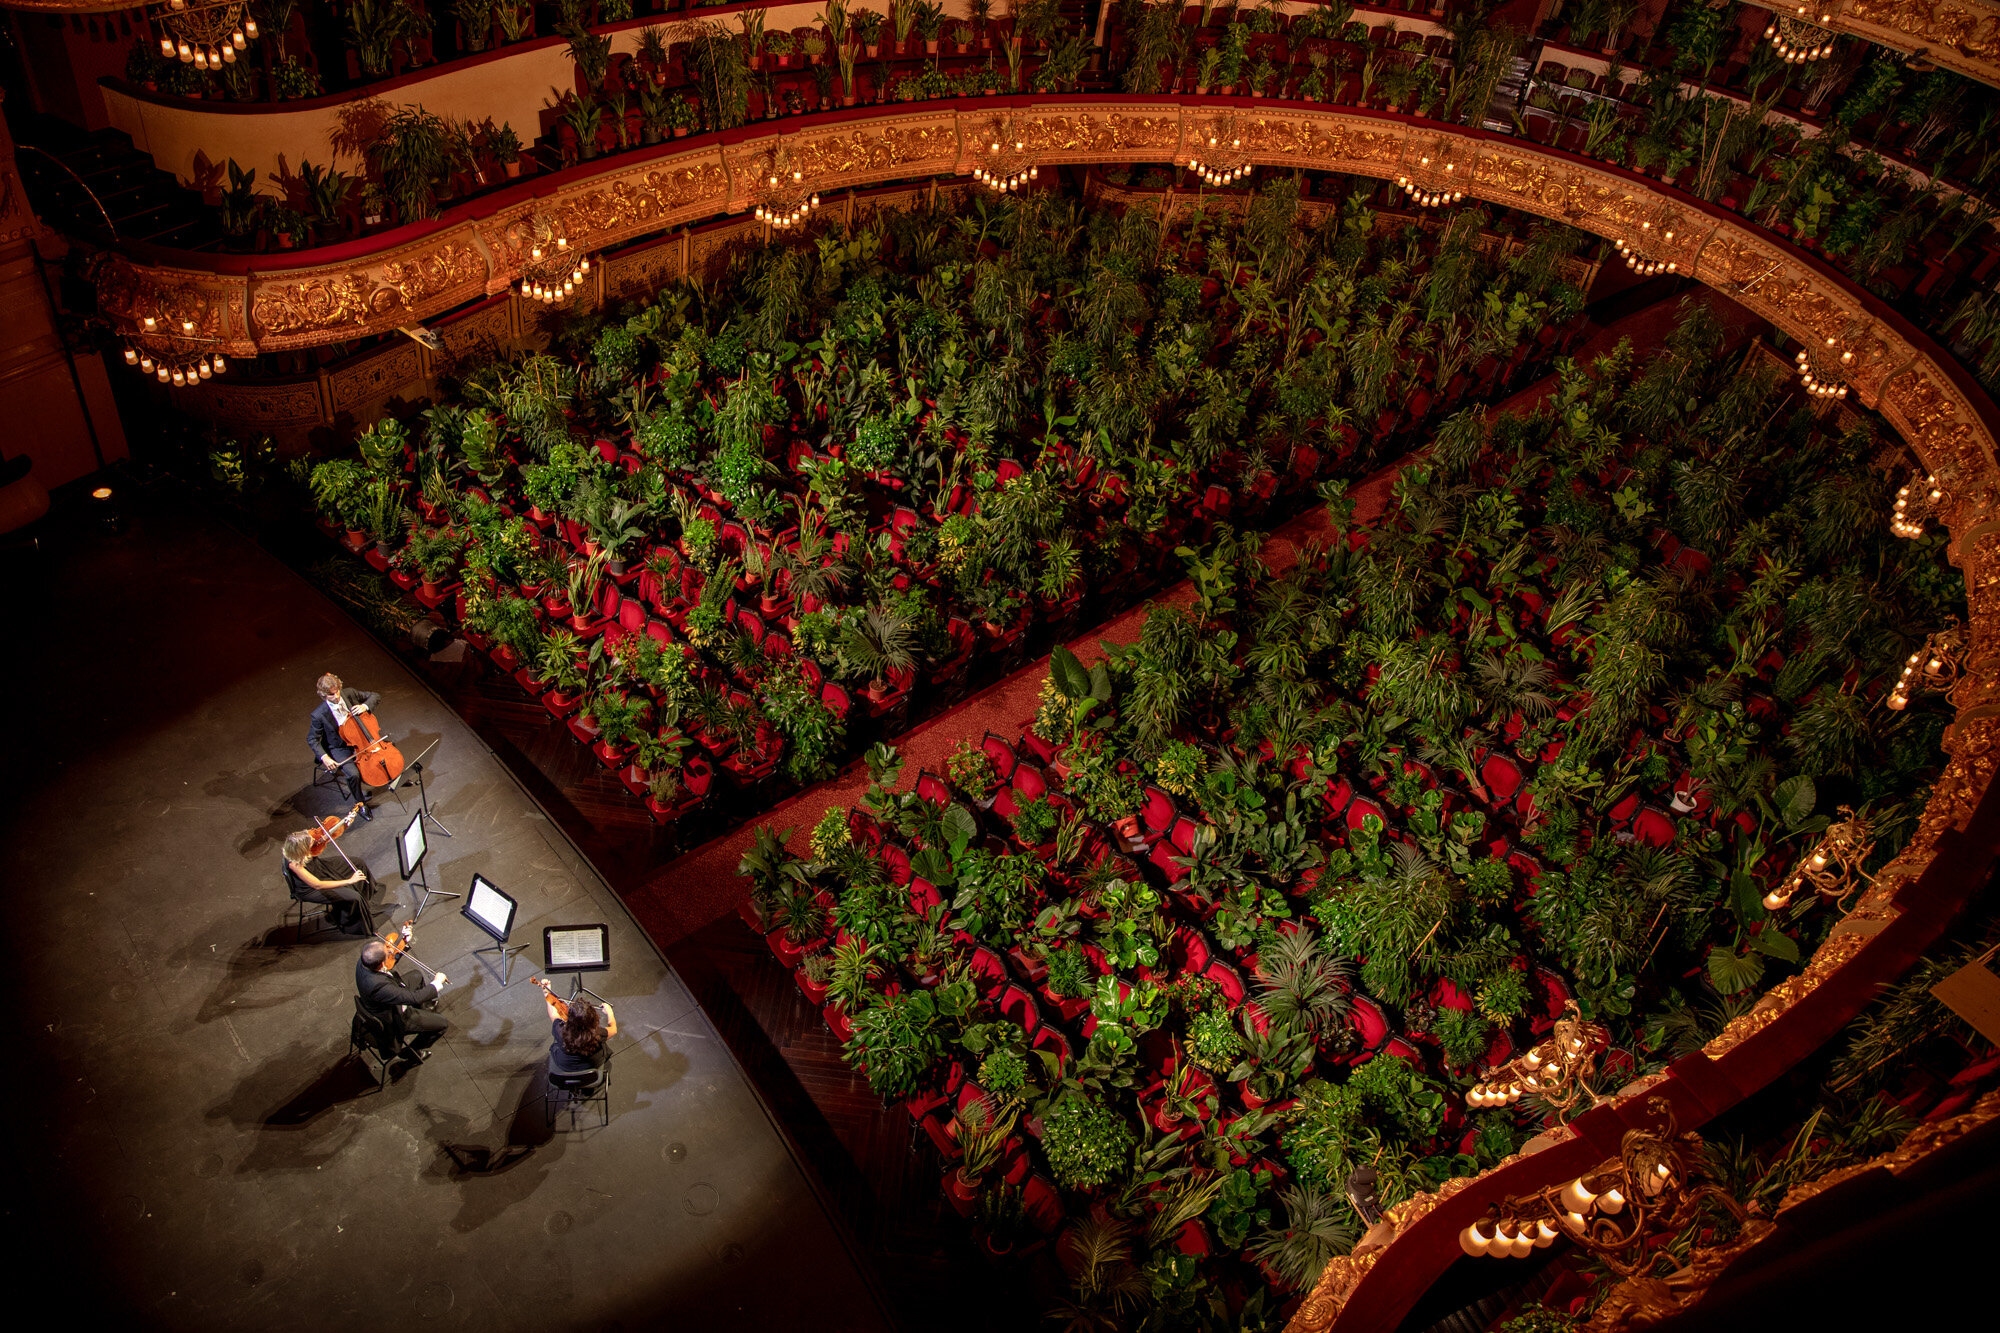  Musicians rehears at the Gran Teatre del Liceu in Barcelona, Spain, on June 22, 2020. When the doors opened for the performance of Puccini’s “Crisantemi” by the UceLi Quartet, the 2,292 seats of the auditorium were occupied by plants and the perform